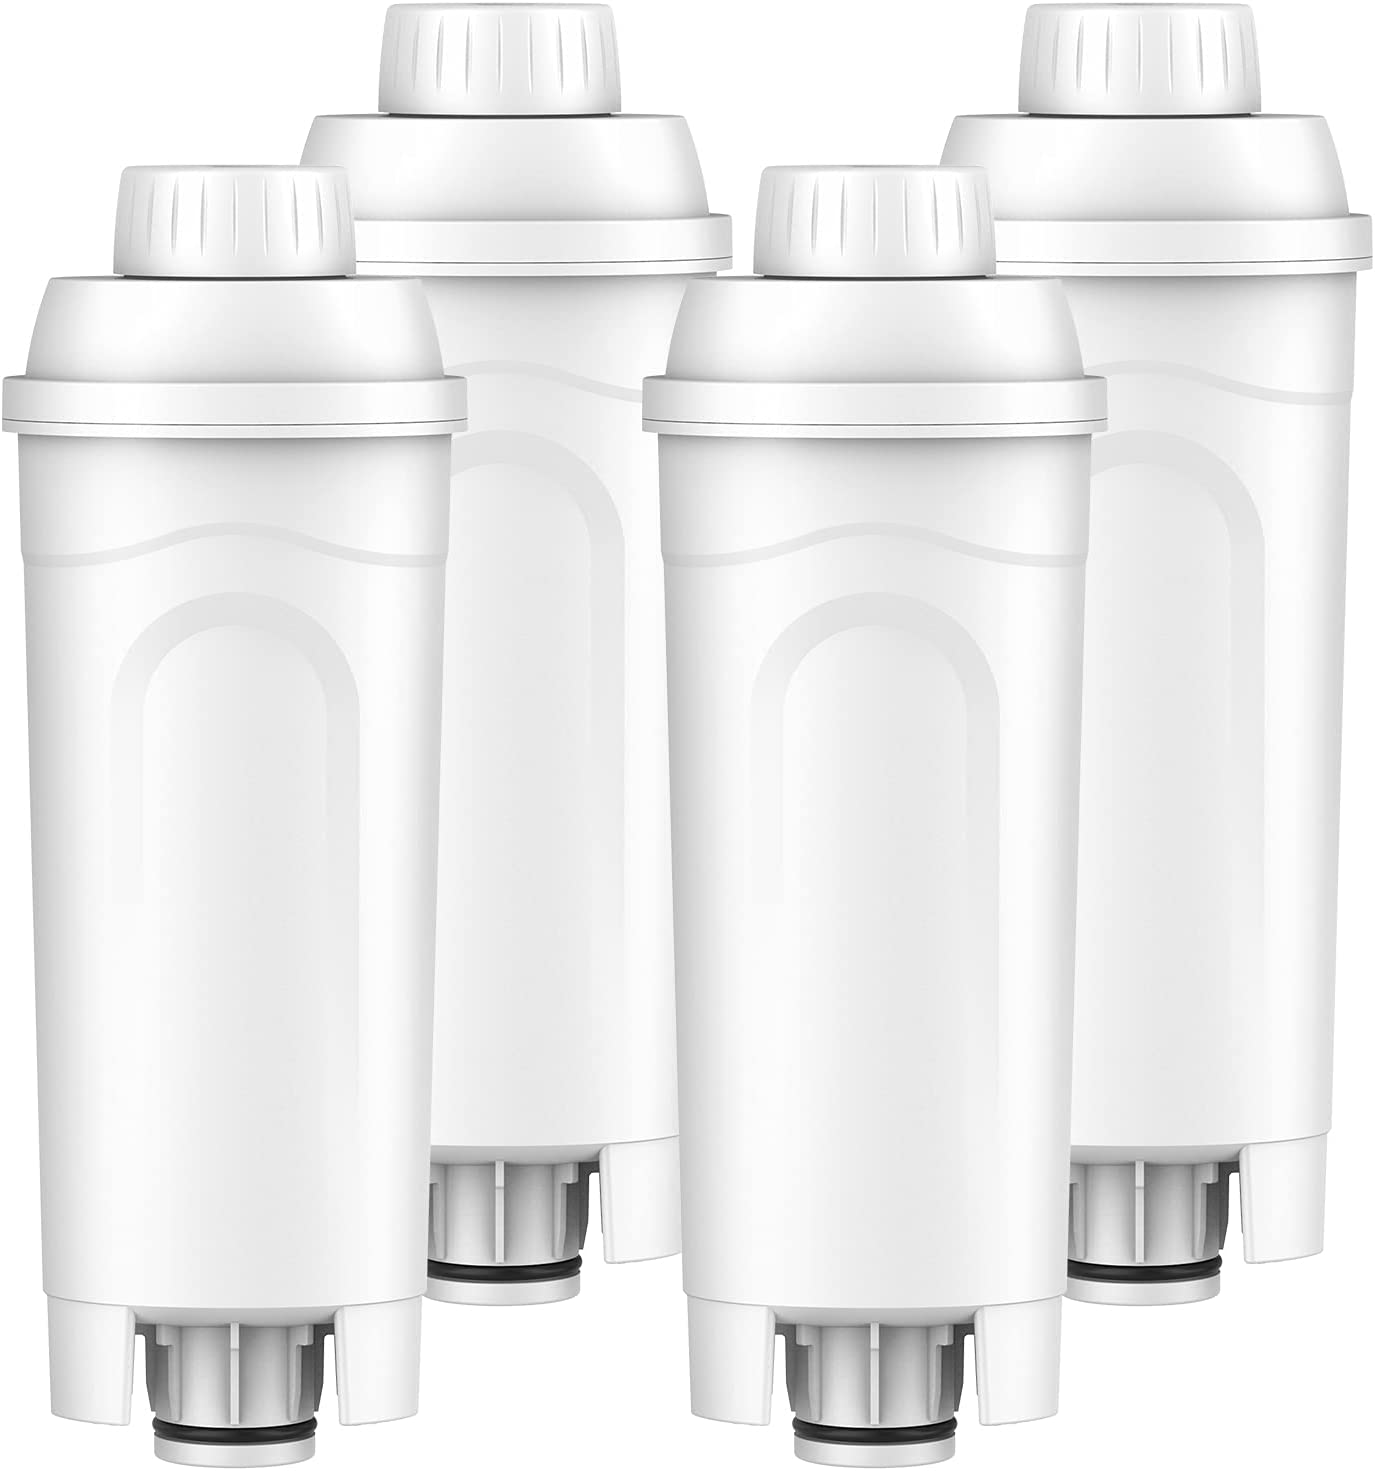  DE'LONGHI WATER FILTER SOFTENER DLSC002 (Pack of 1)-White :  Tools & Home Improvement